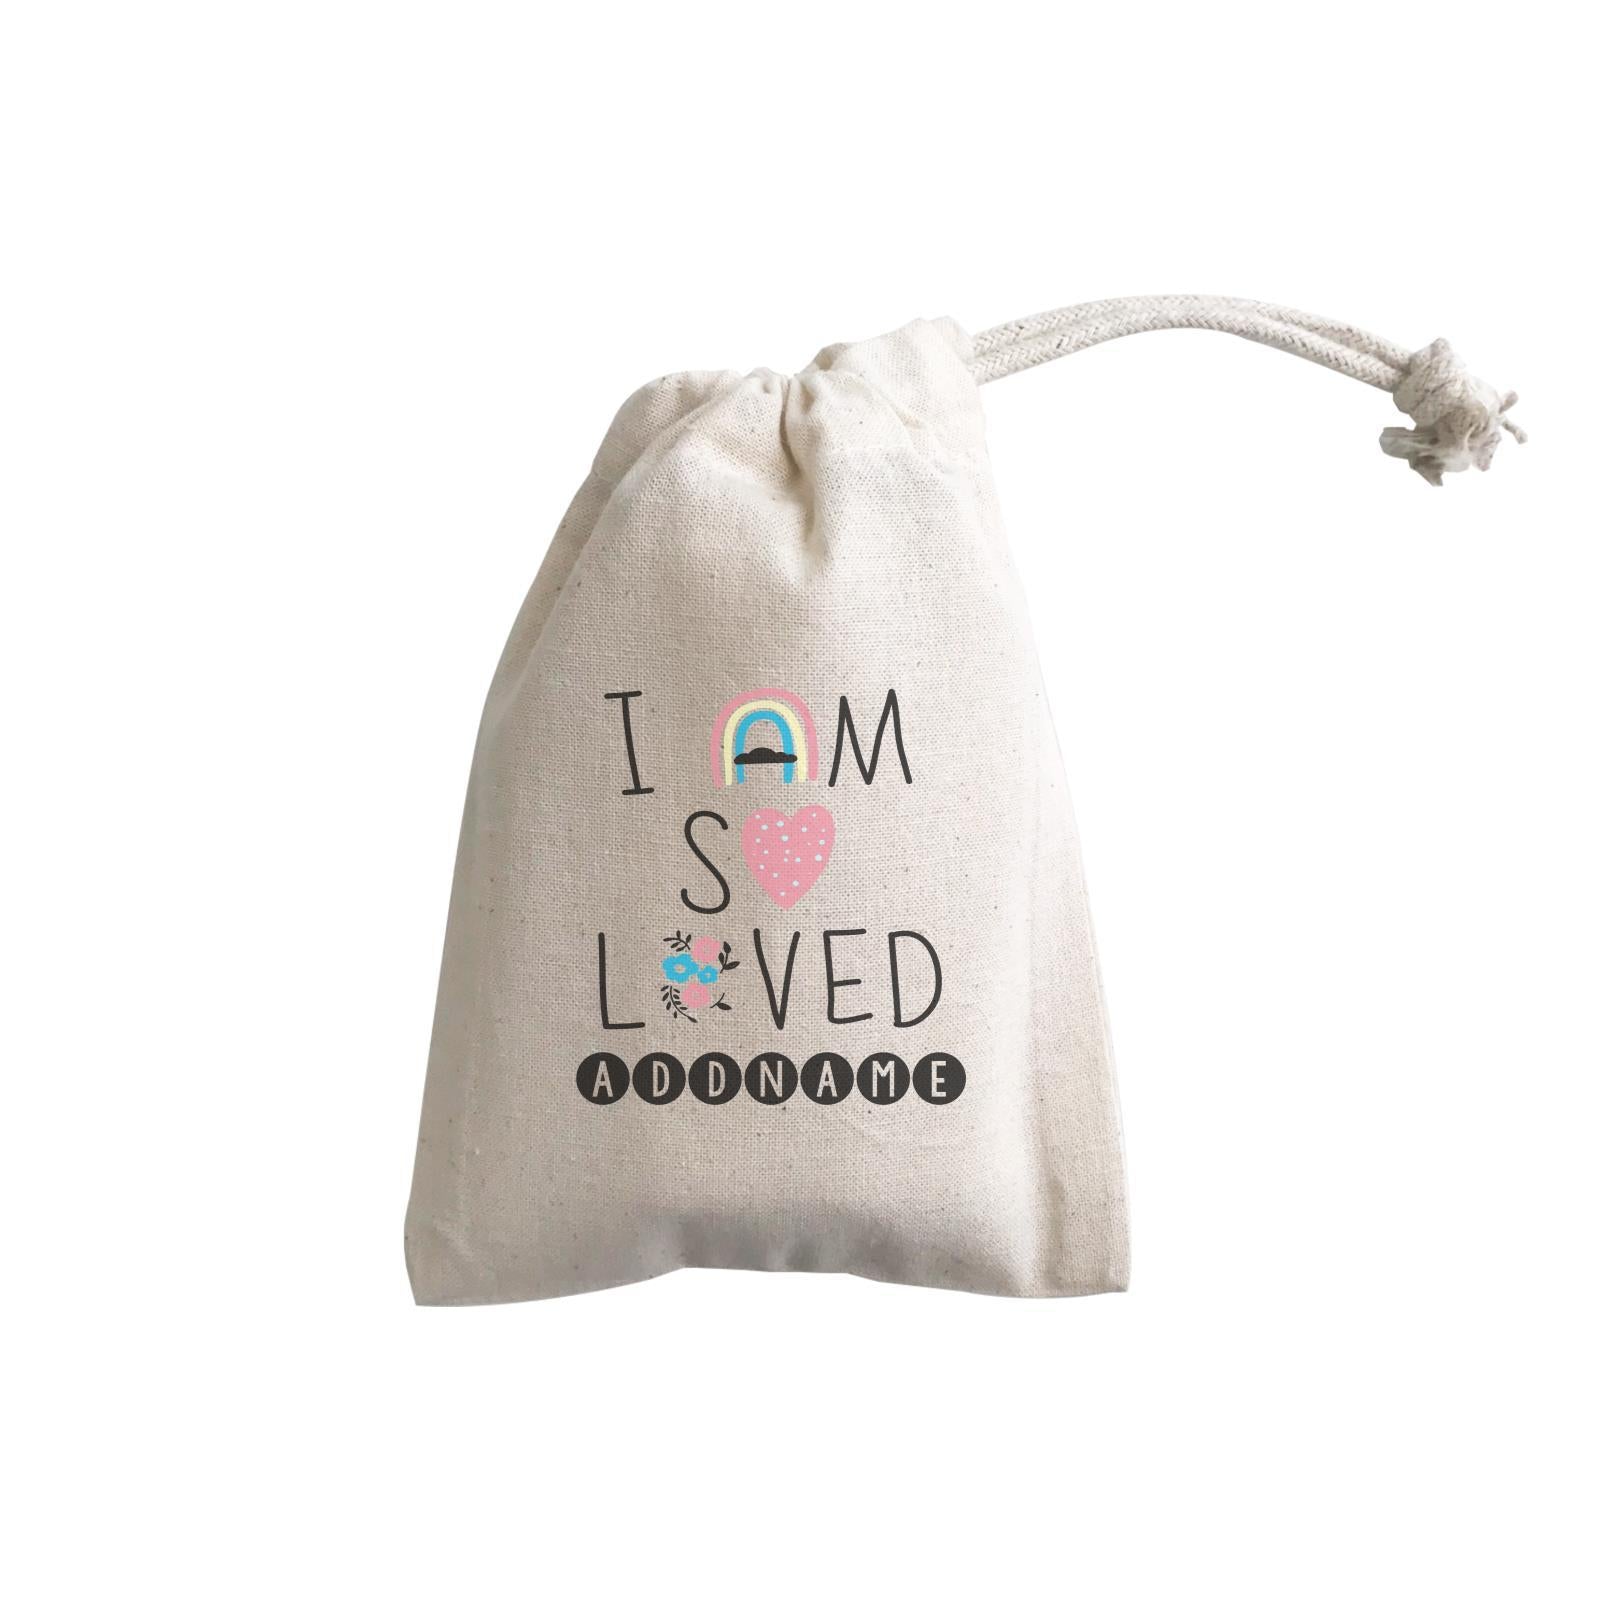 Children's Day Gift Series I Am So Loved Addname  Gift Pouch